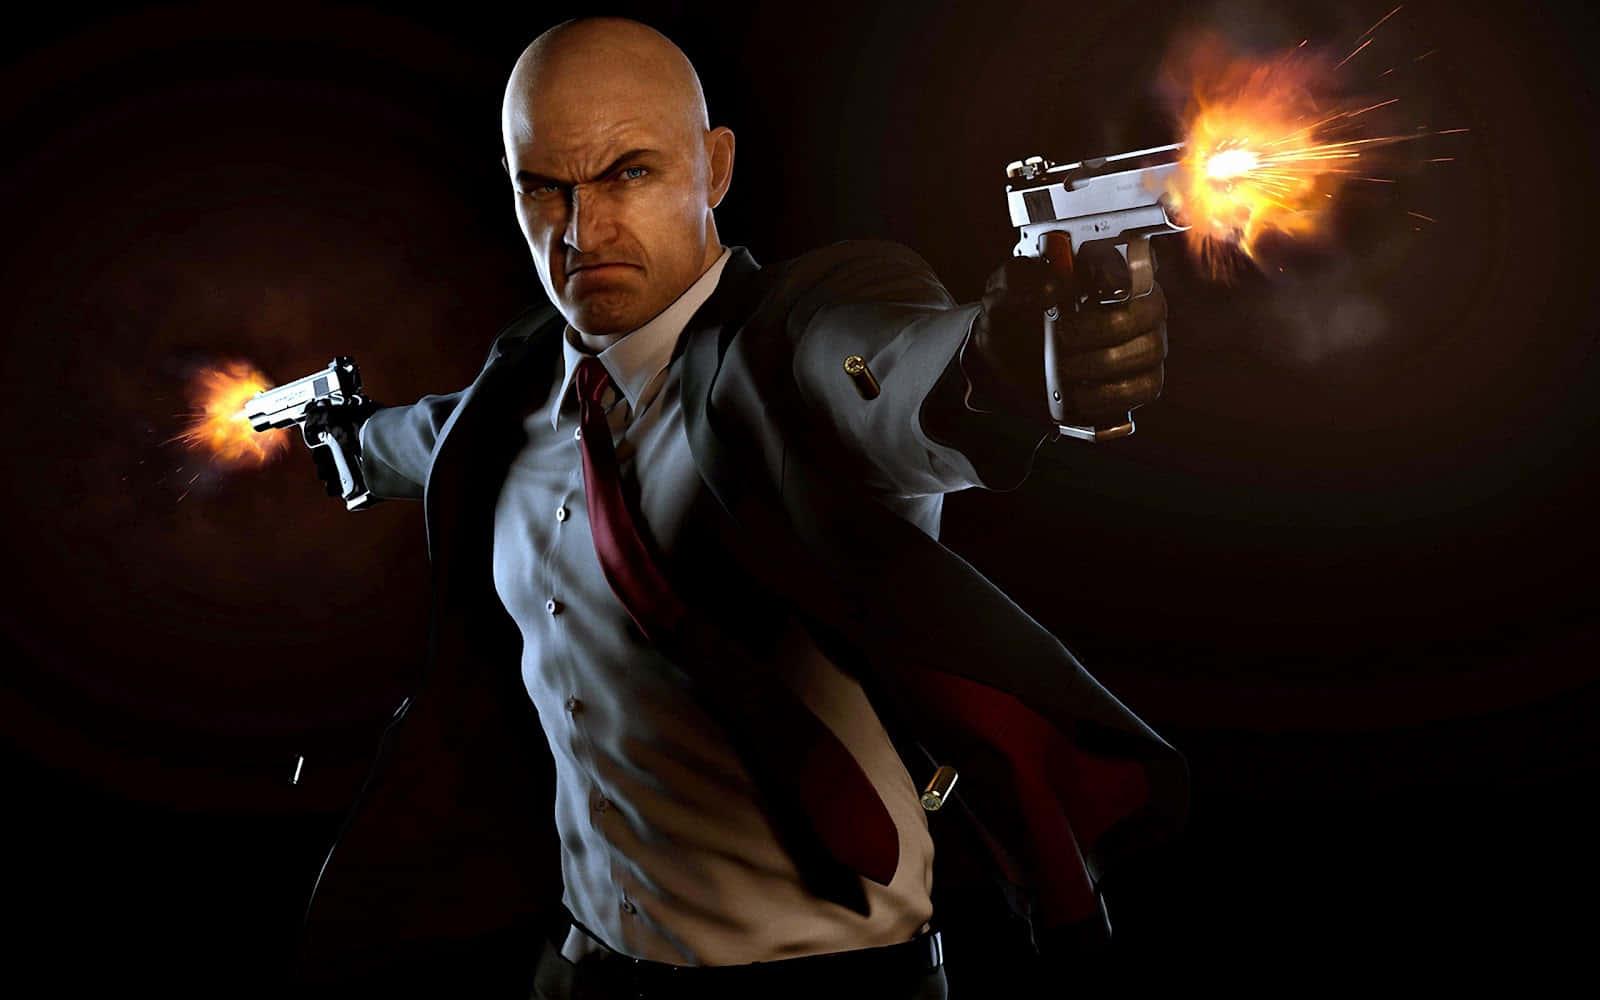 Agent 47 on a mission for the ICA in ‘Hitman Absolution’